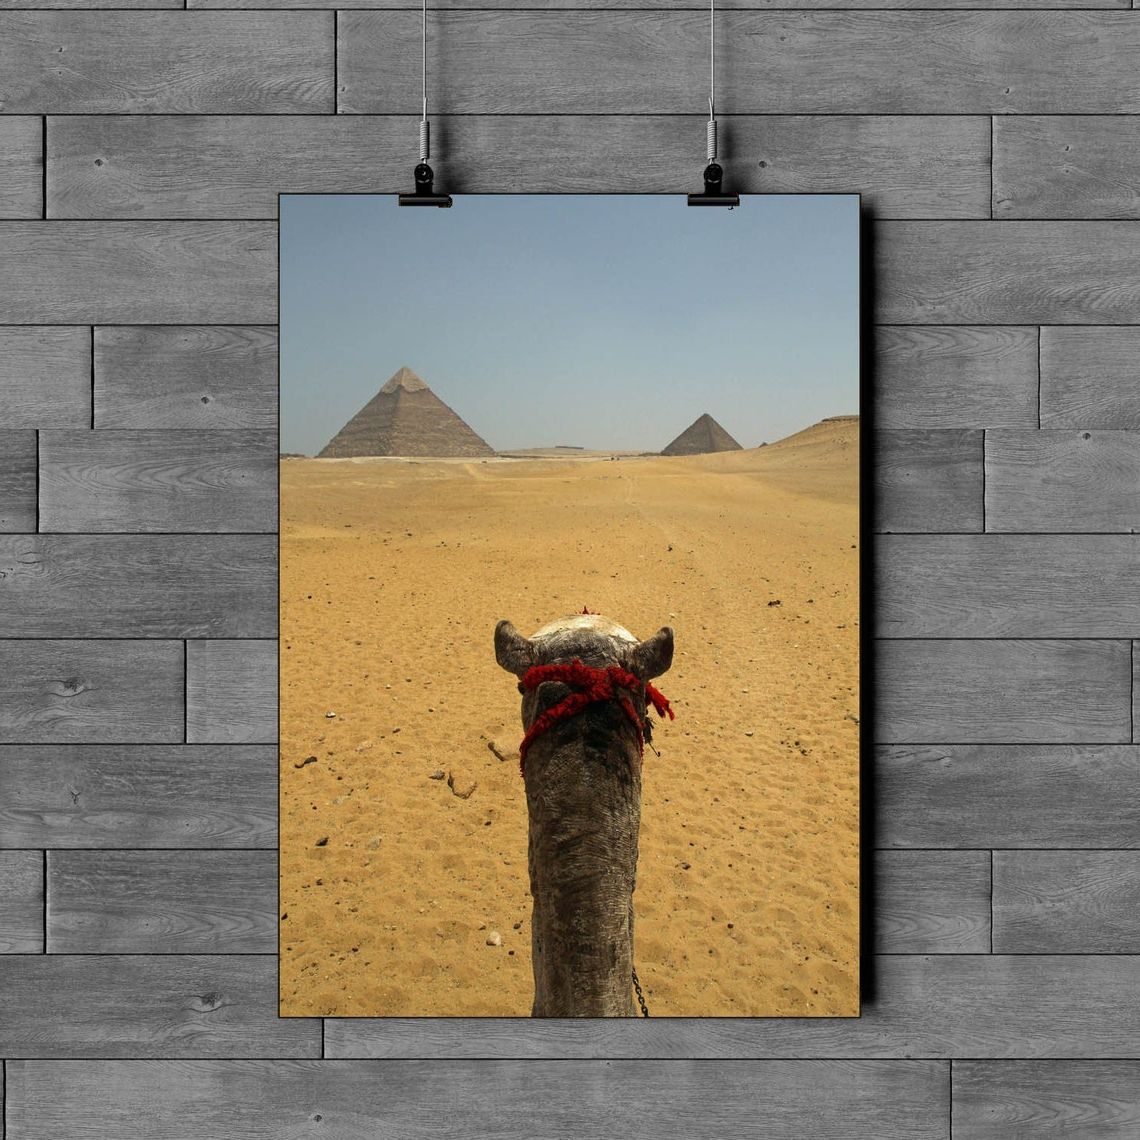 Widely Used Egypt Wall Art Pyramids Poster Camel Decor Camel Wall Art With Pyrimids Wall Art (View 7 of 20)